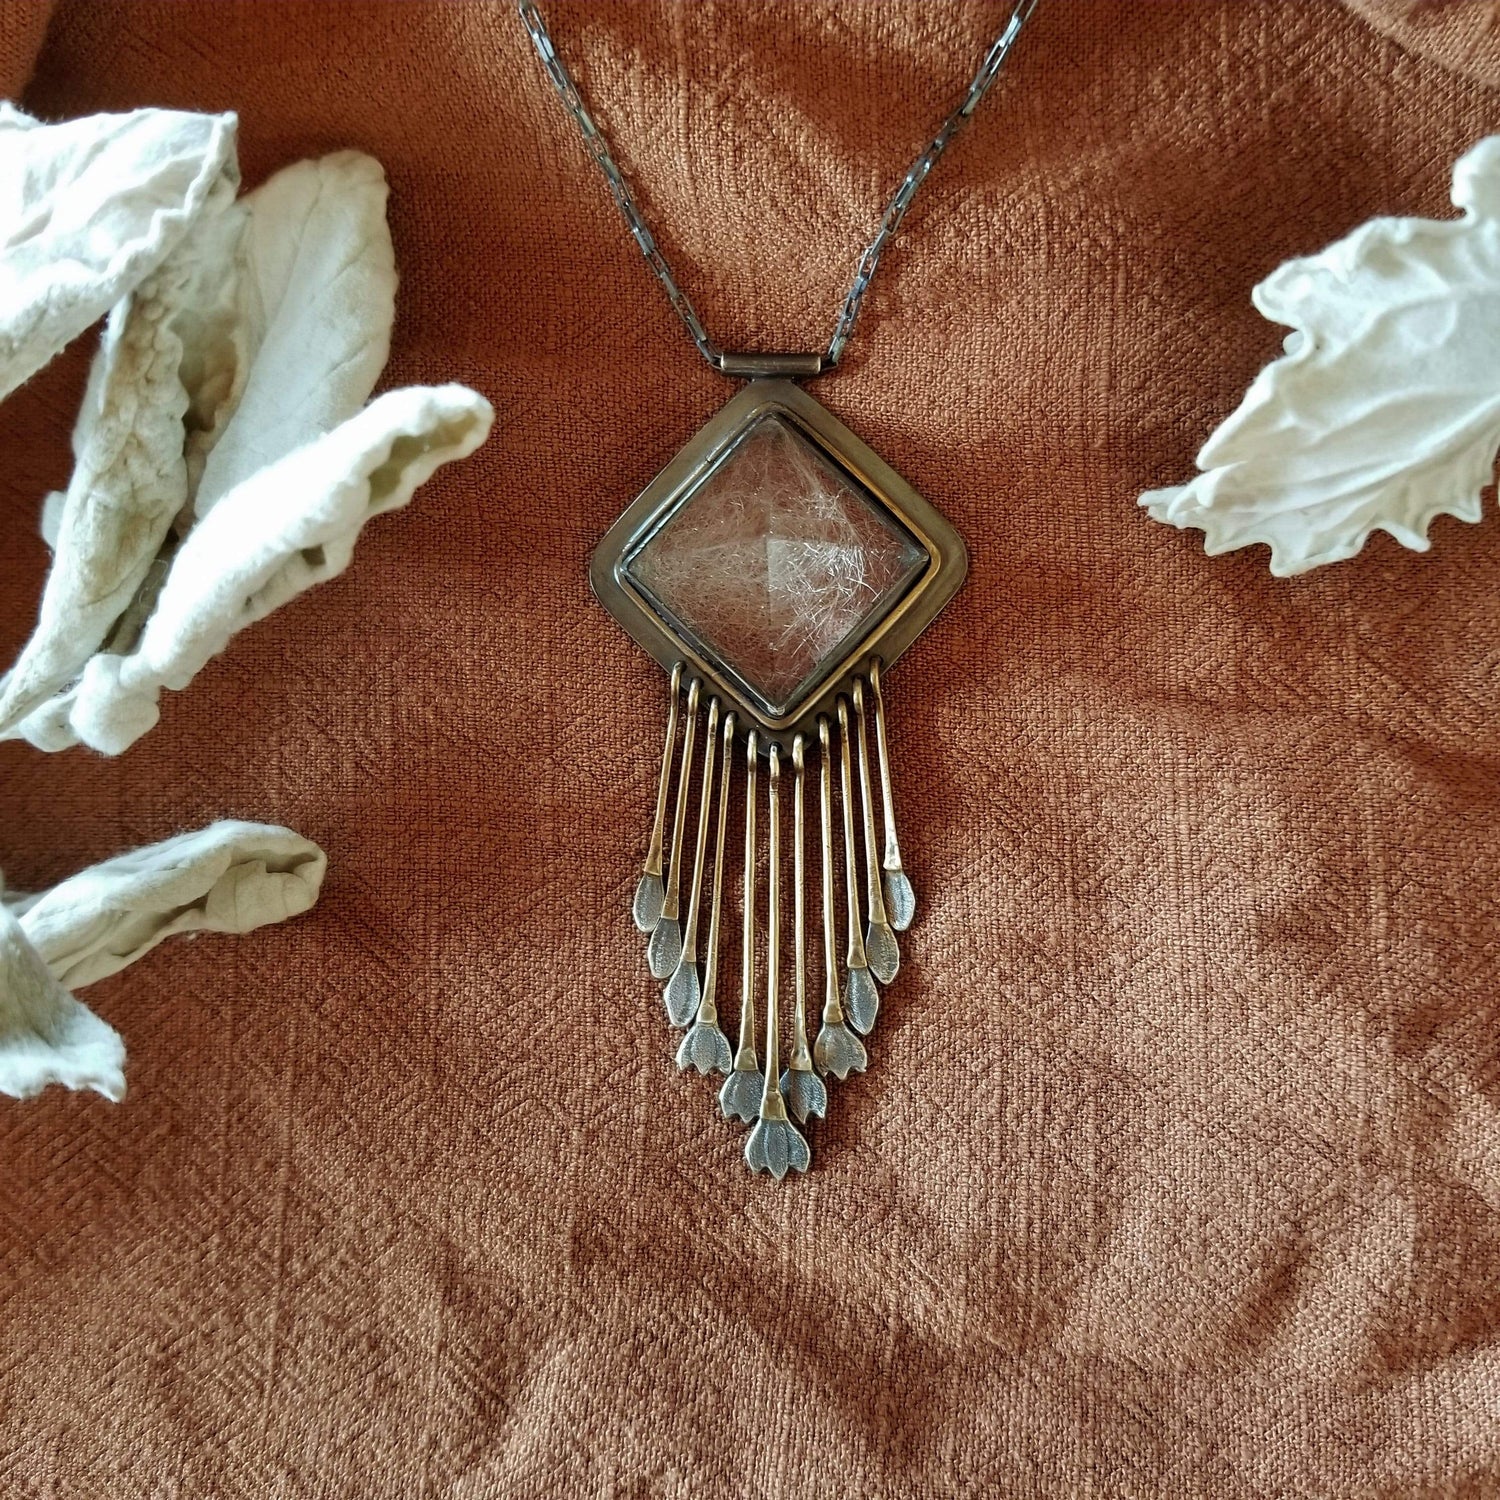 Handmade one of a kind necklace with rutilated quartz set in sterling silver and brass with eleven hand engraved snowdrop flower fringe dangles. All hanging on a sterling silver chain. 